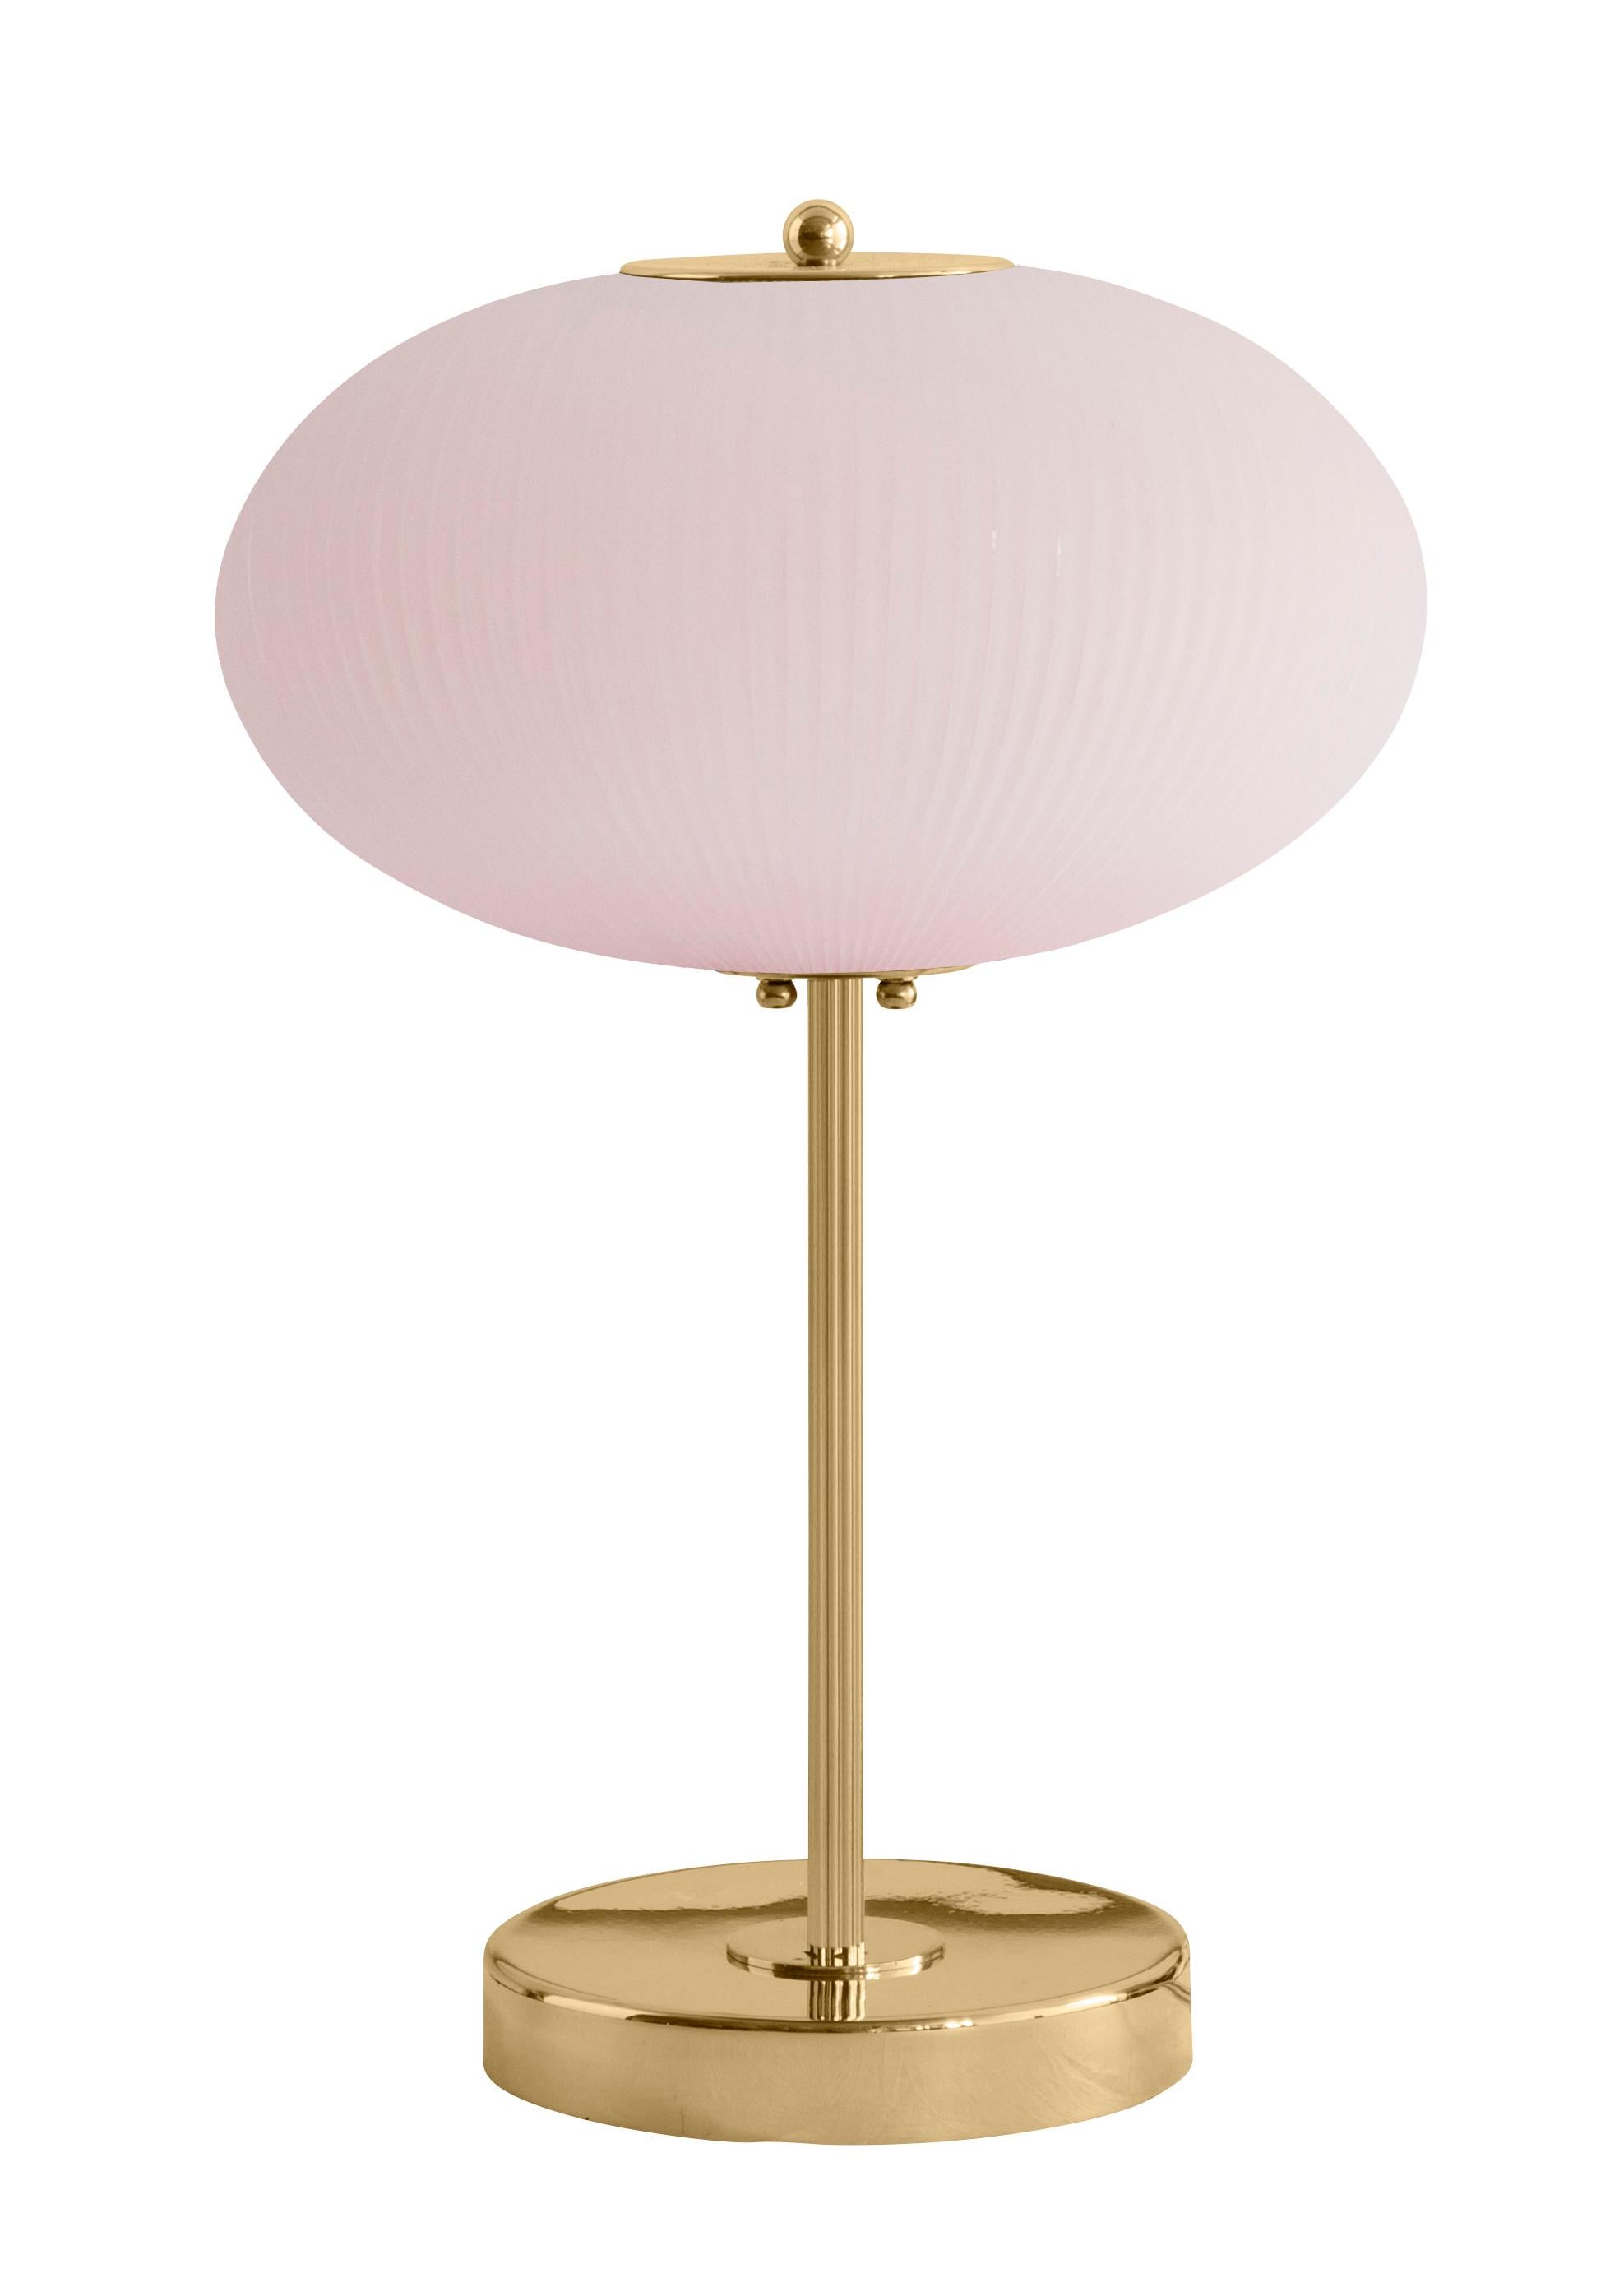 Set of 2 table lamp China 07 by Magic Circus Editions
Dimensions: H 50 x W 32 x D 32 cm
Materials: Brass, mouth blown glass sculpted with a diamond saw
Colour: soft rose

Available finishes: Brass, nickel
Available colours: enamel soft white, soft